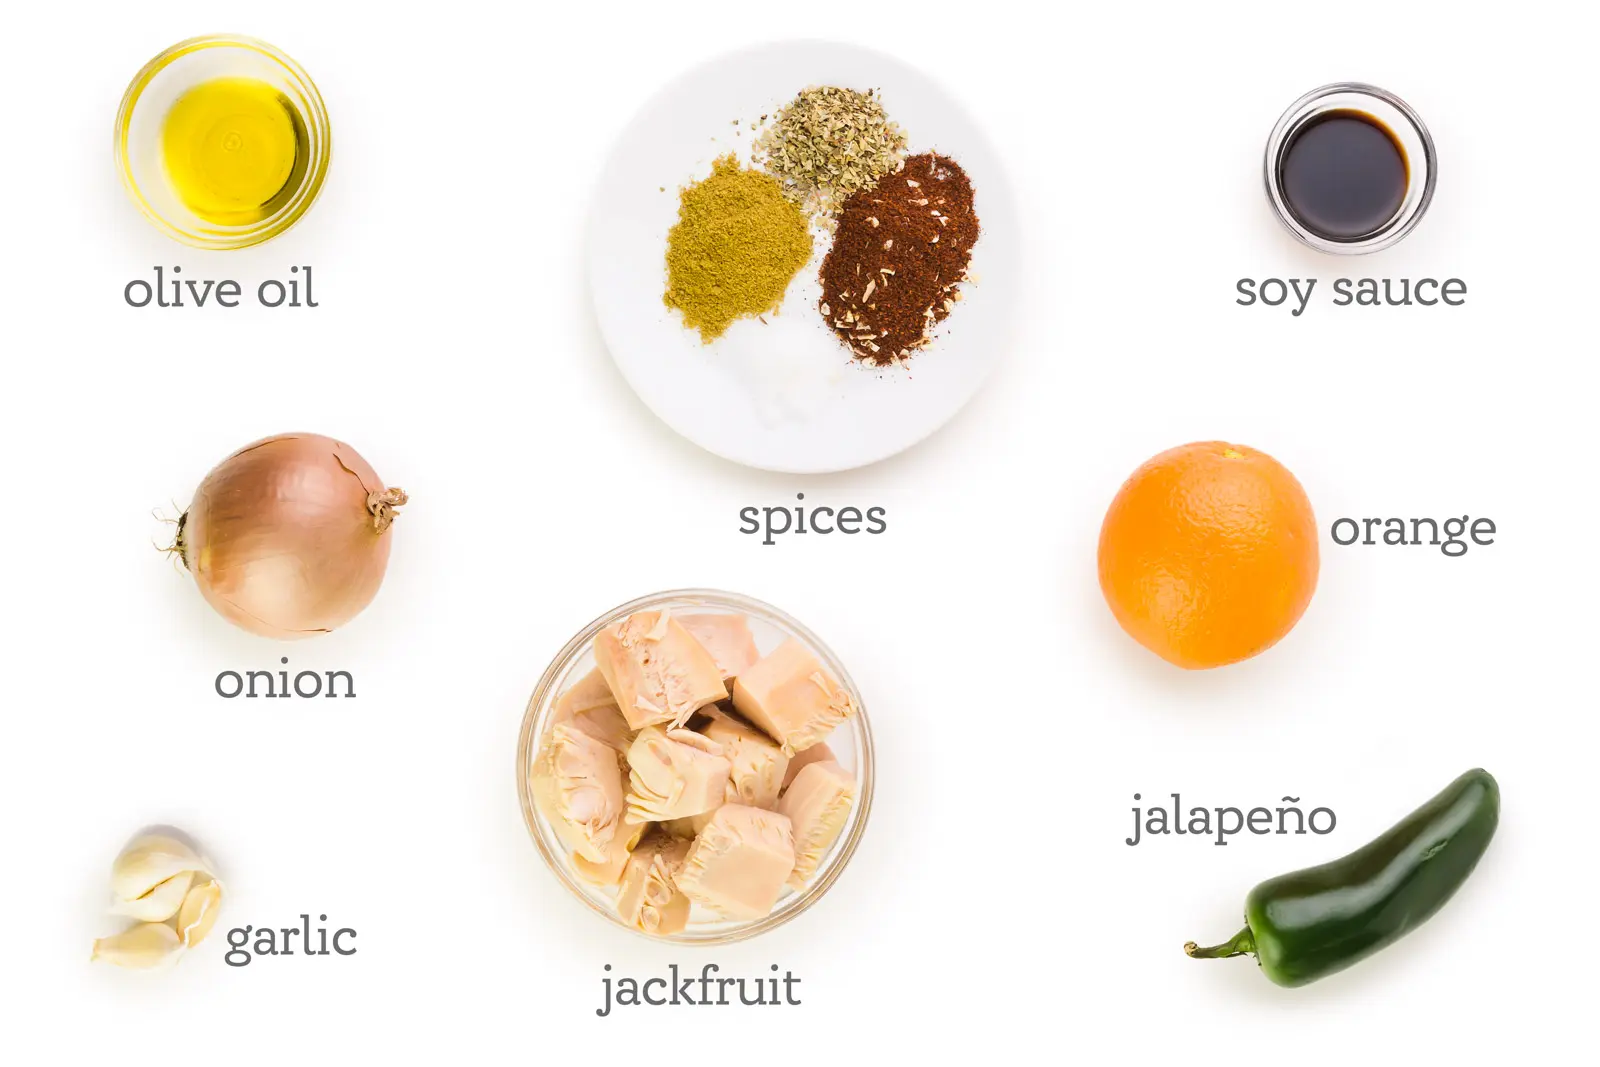 Ingredient for jackfruit carnitas are on a white table. The labels next to each ingredient reads, soy sauce, orange, jalapeño, jackfruit, garlic, onion, olive oil, and spices.